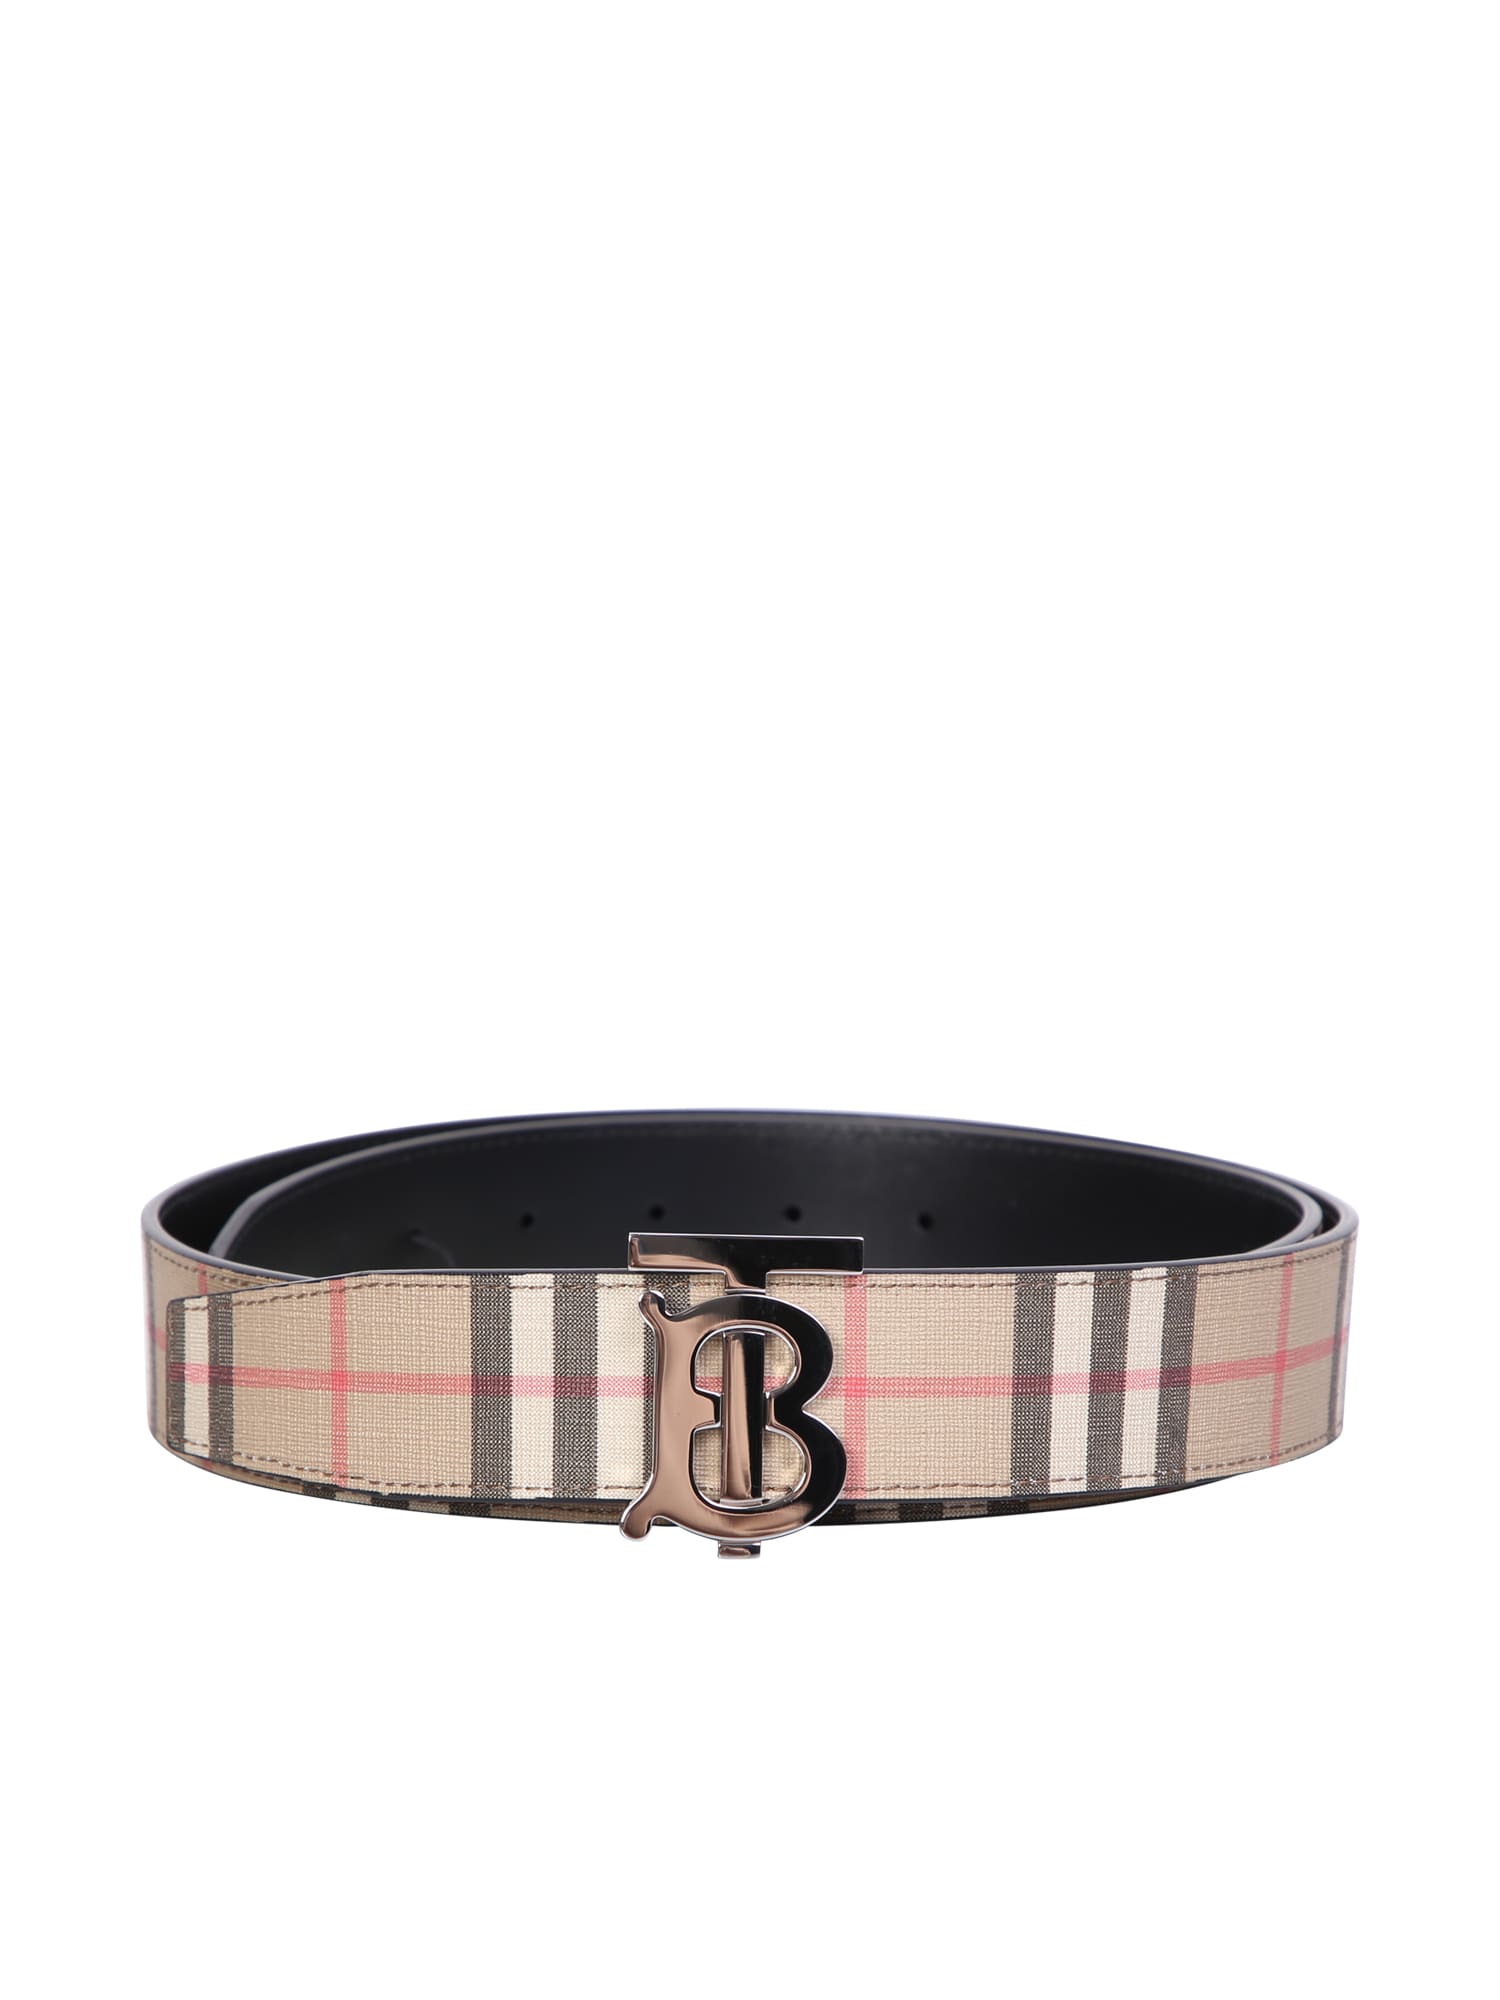 Burberry Check And Leather Belt In Beige